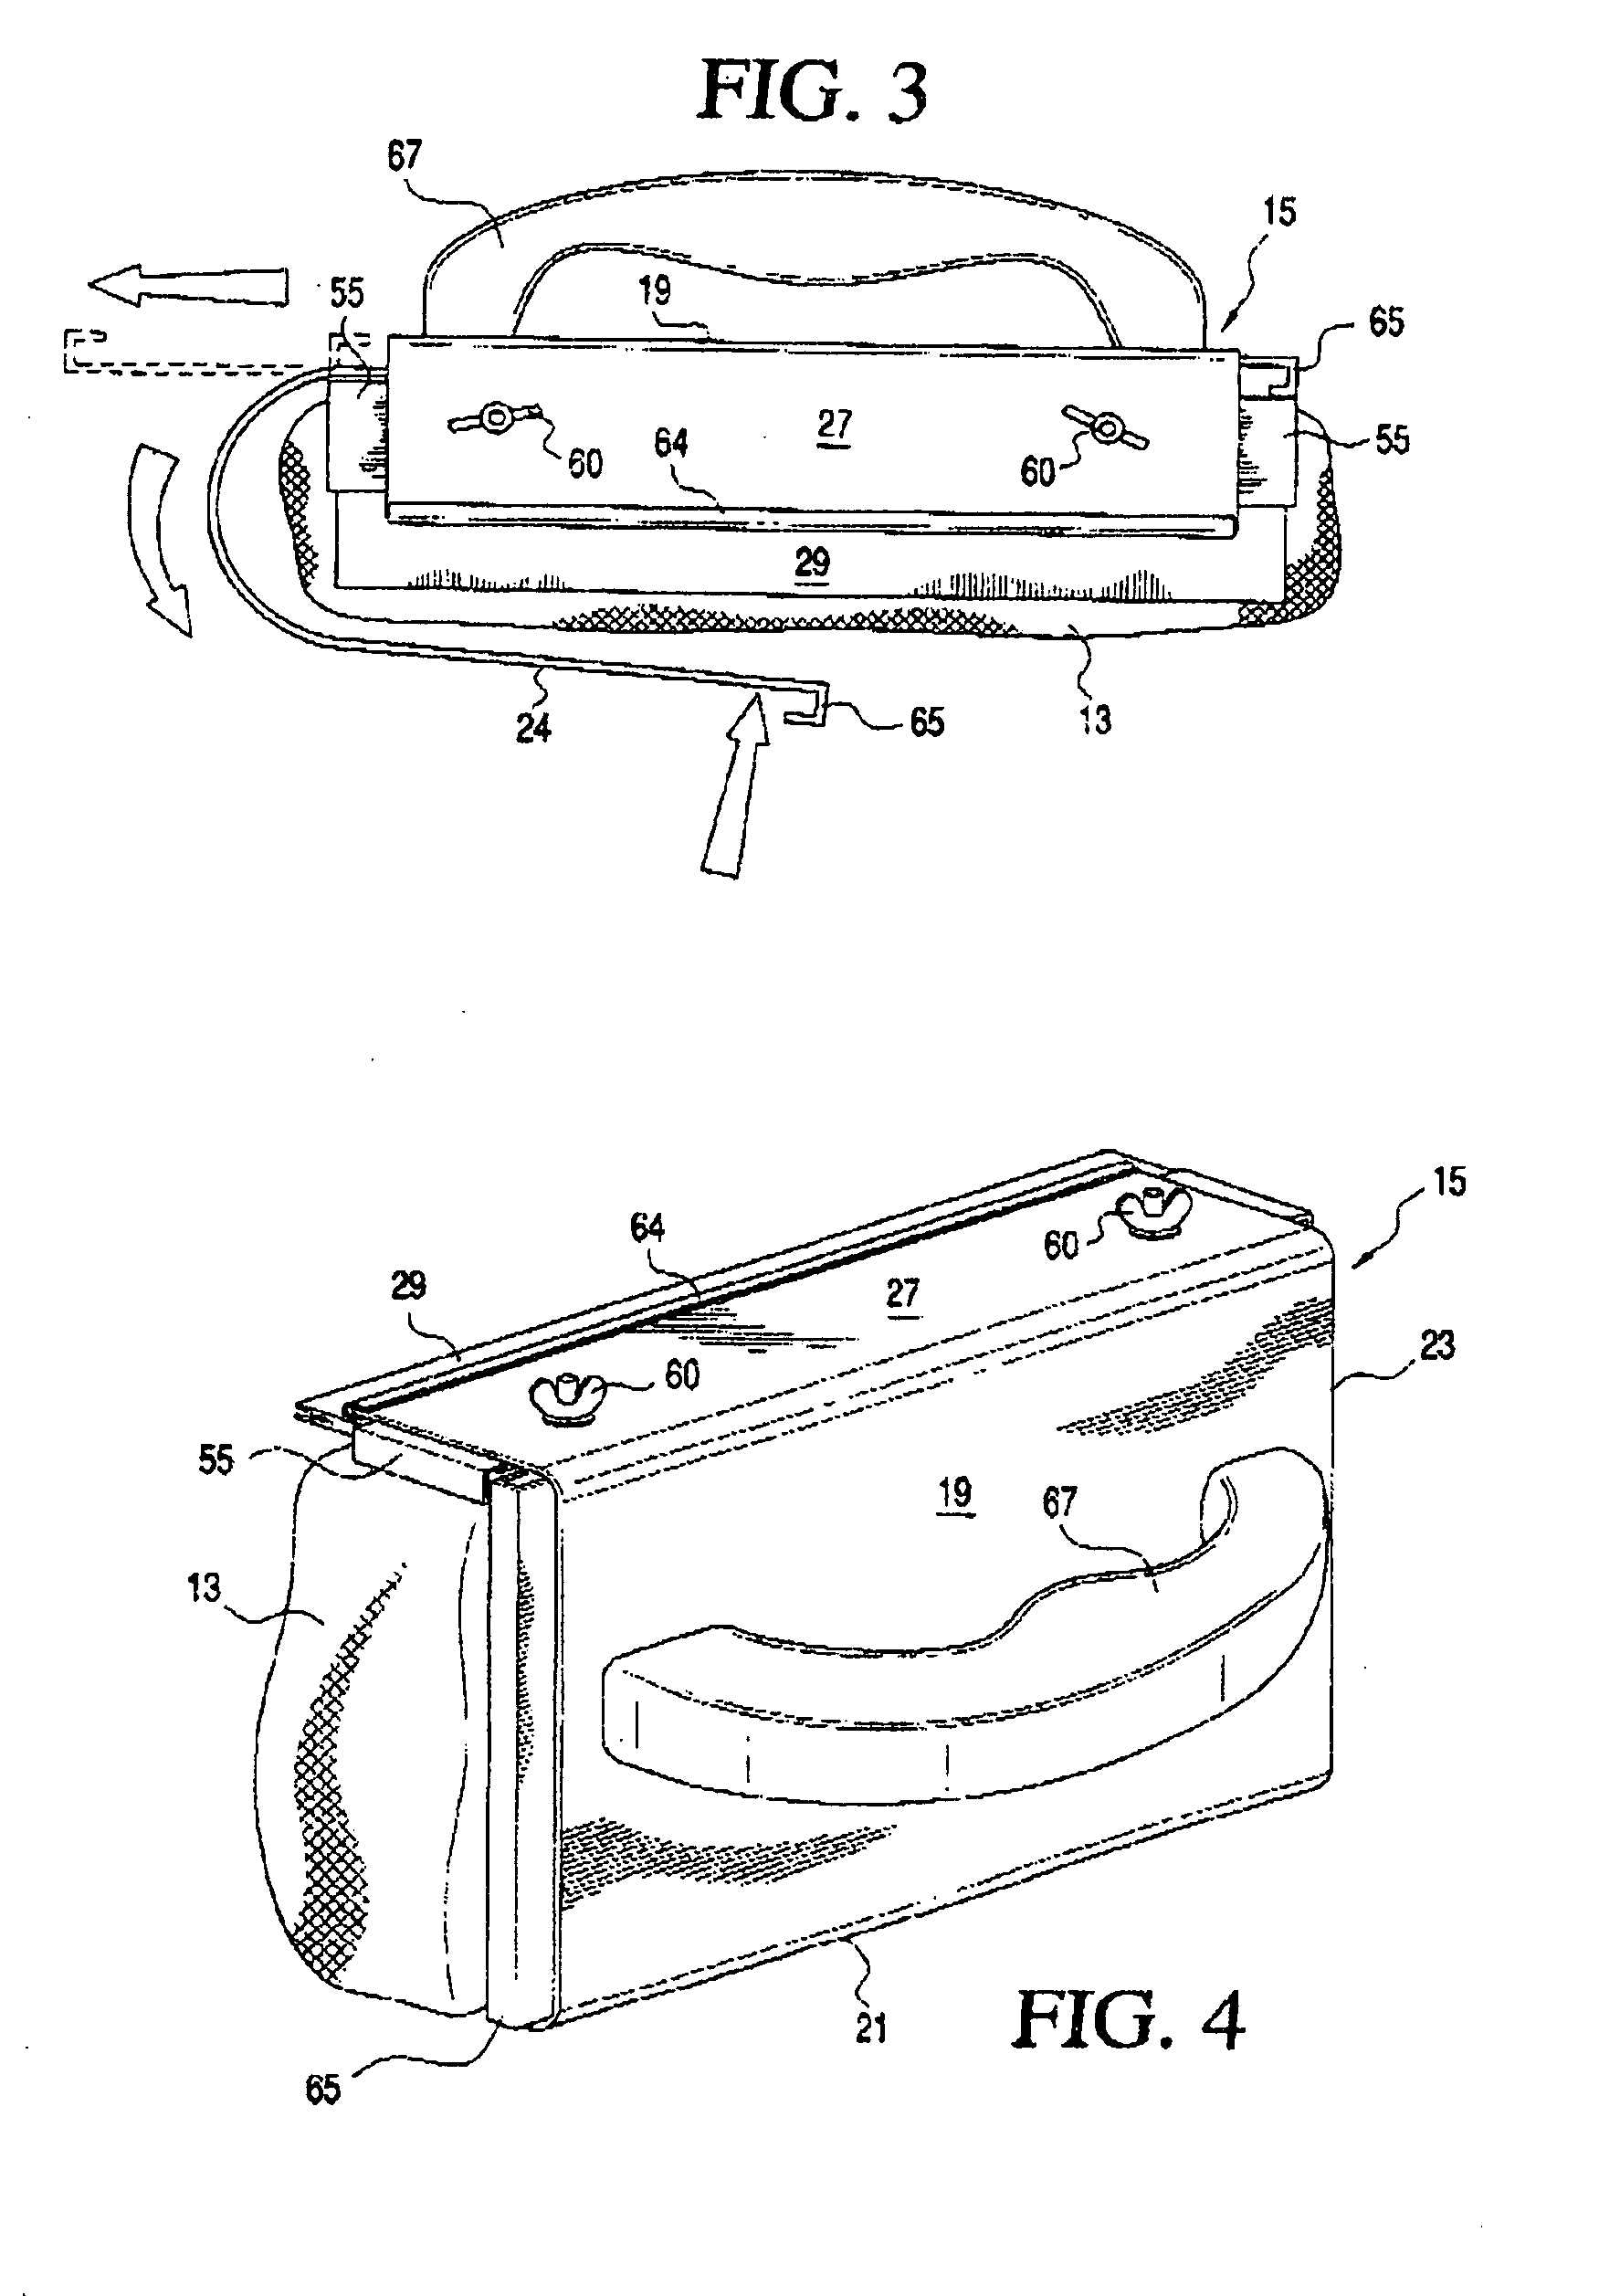 Device for cleaning and drying a surface